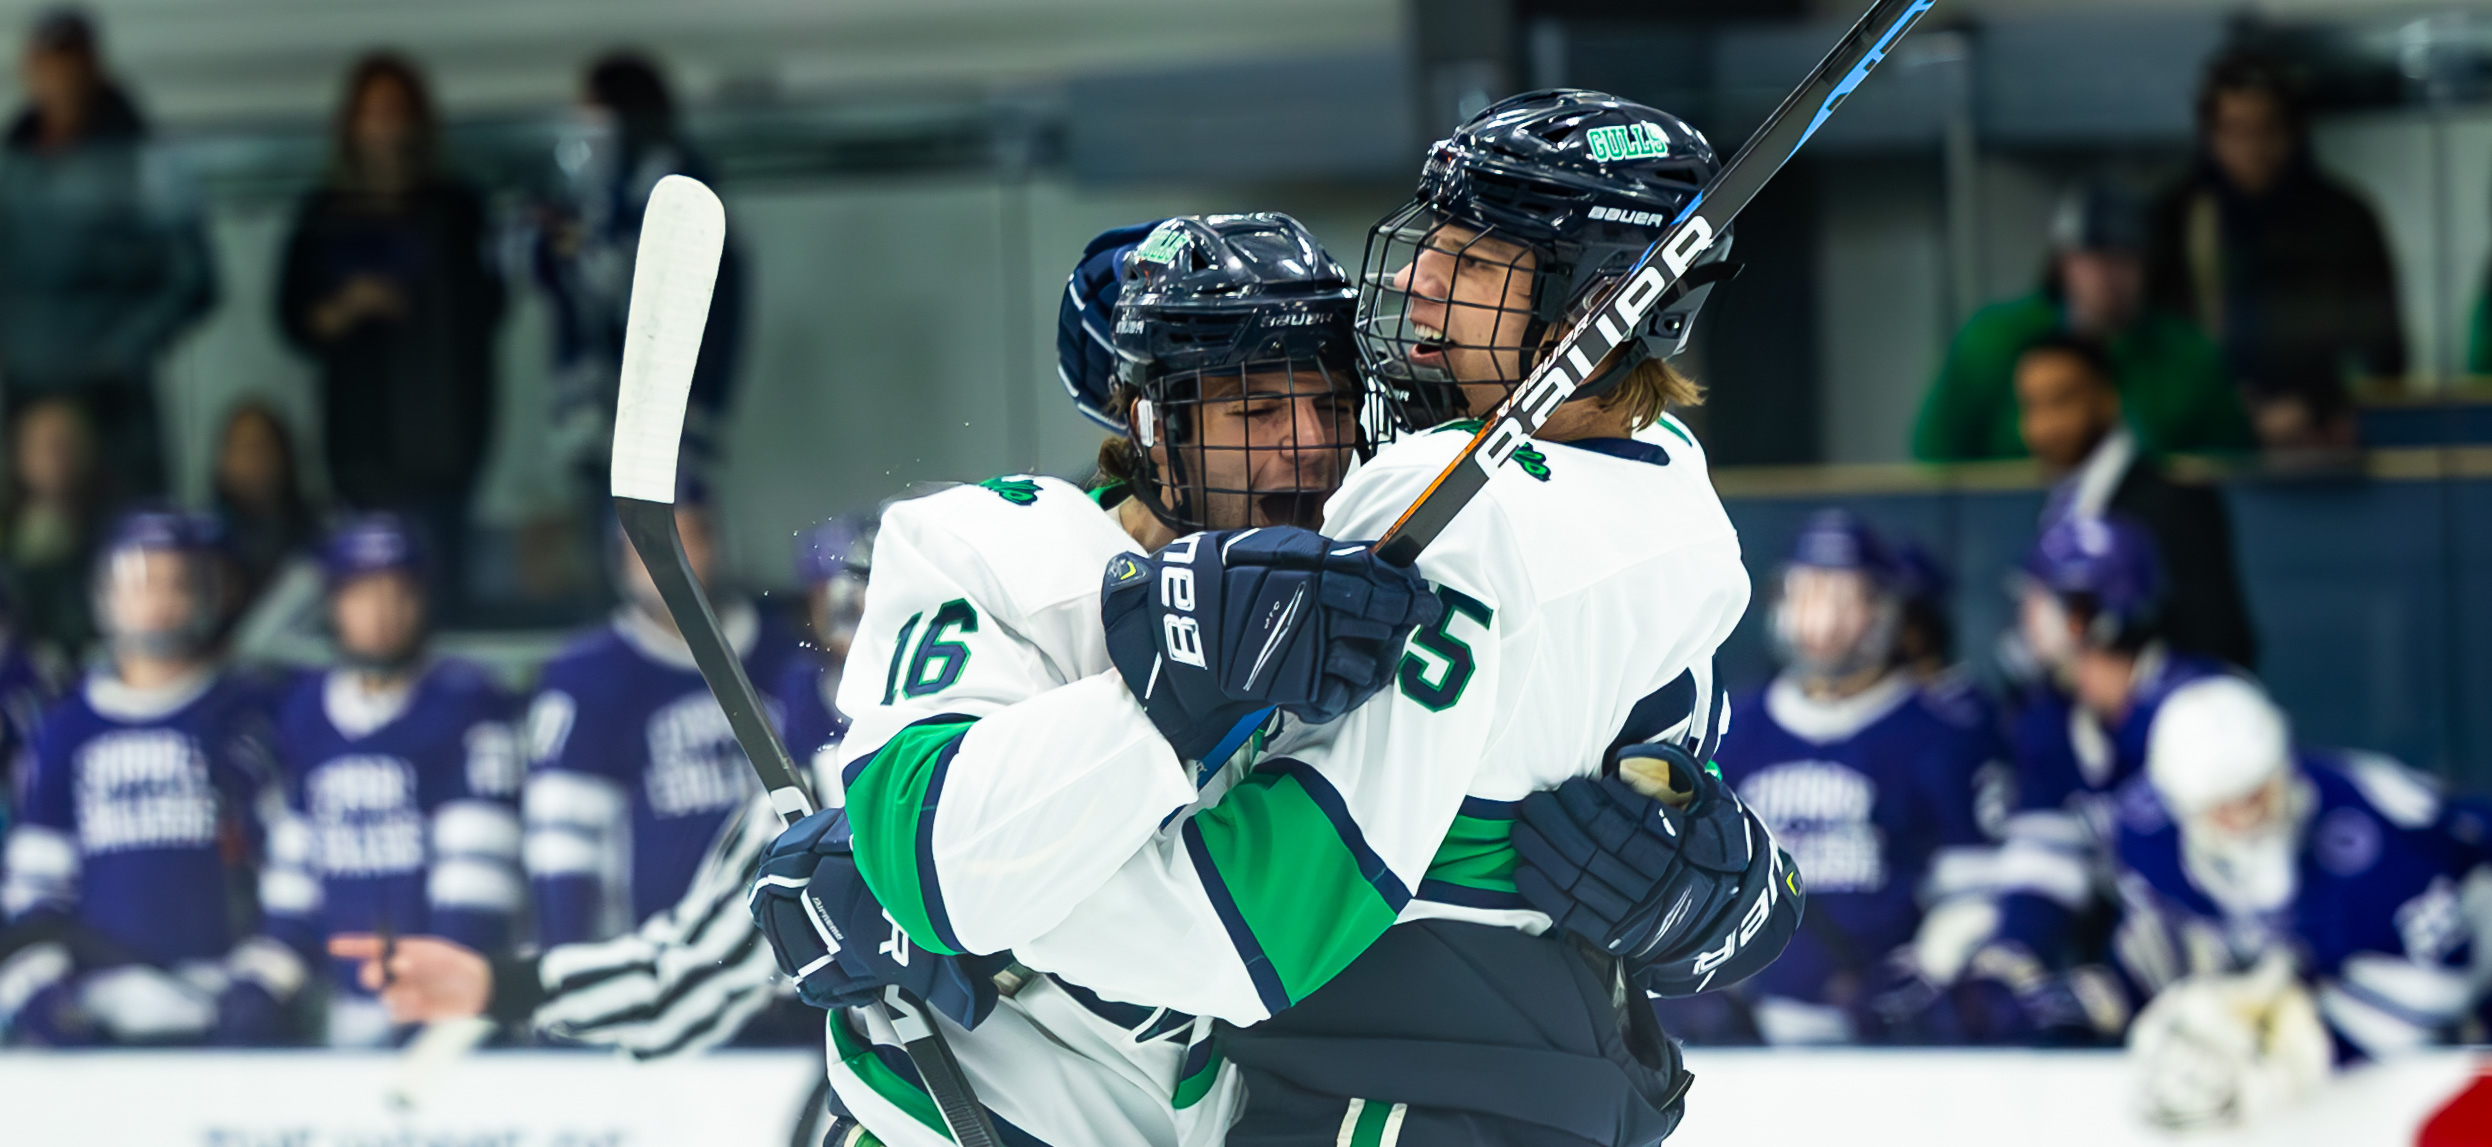 No. 7 Men’s Ice Hockey Takes Down No. 13 Curry, 6-2